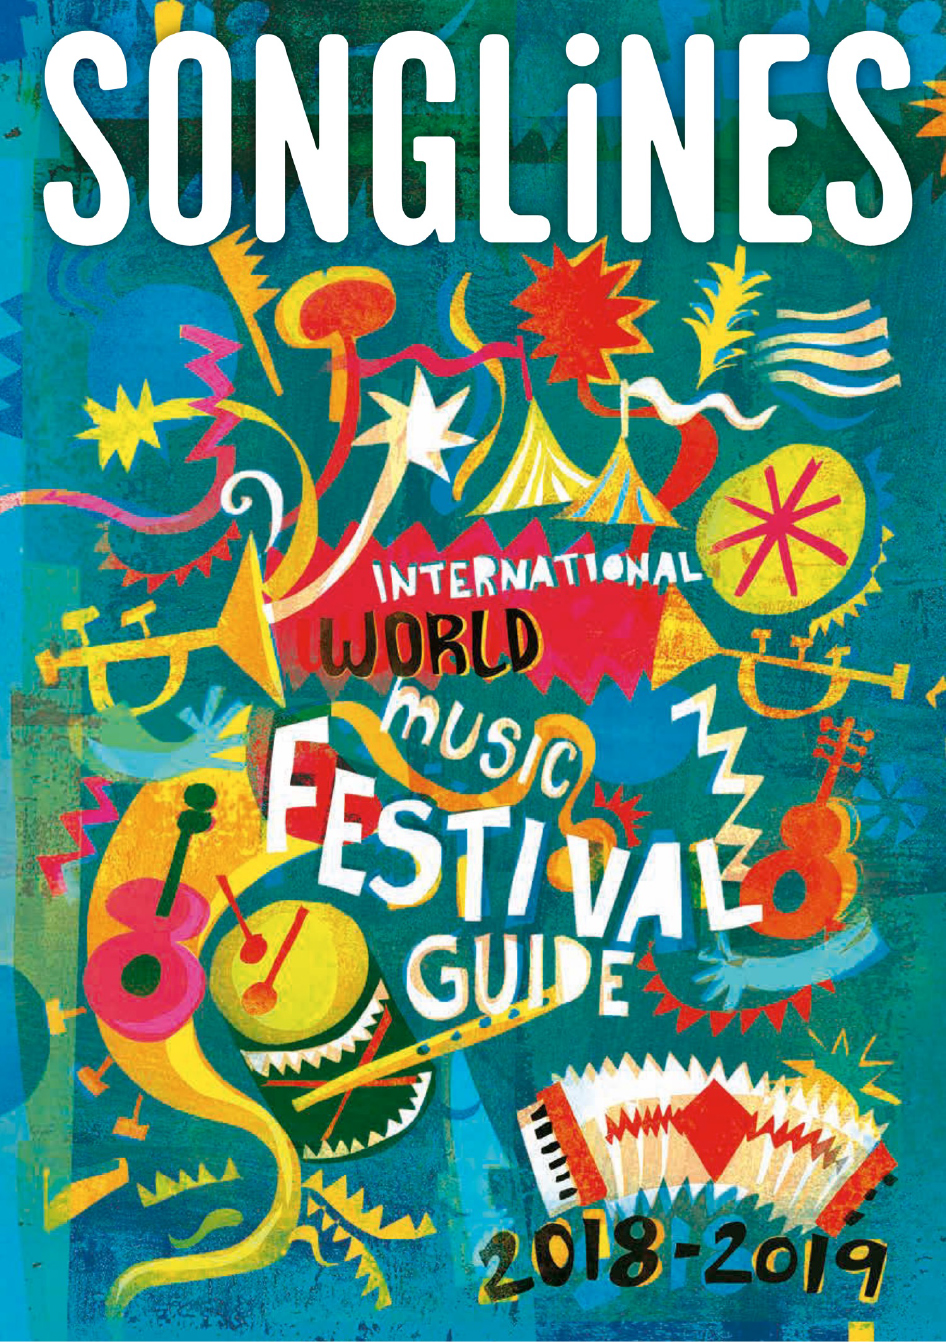 Le Guess Who? 2018 included in Songlines' International Music Festival Guide